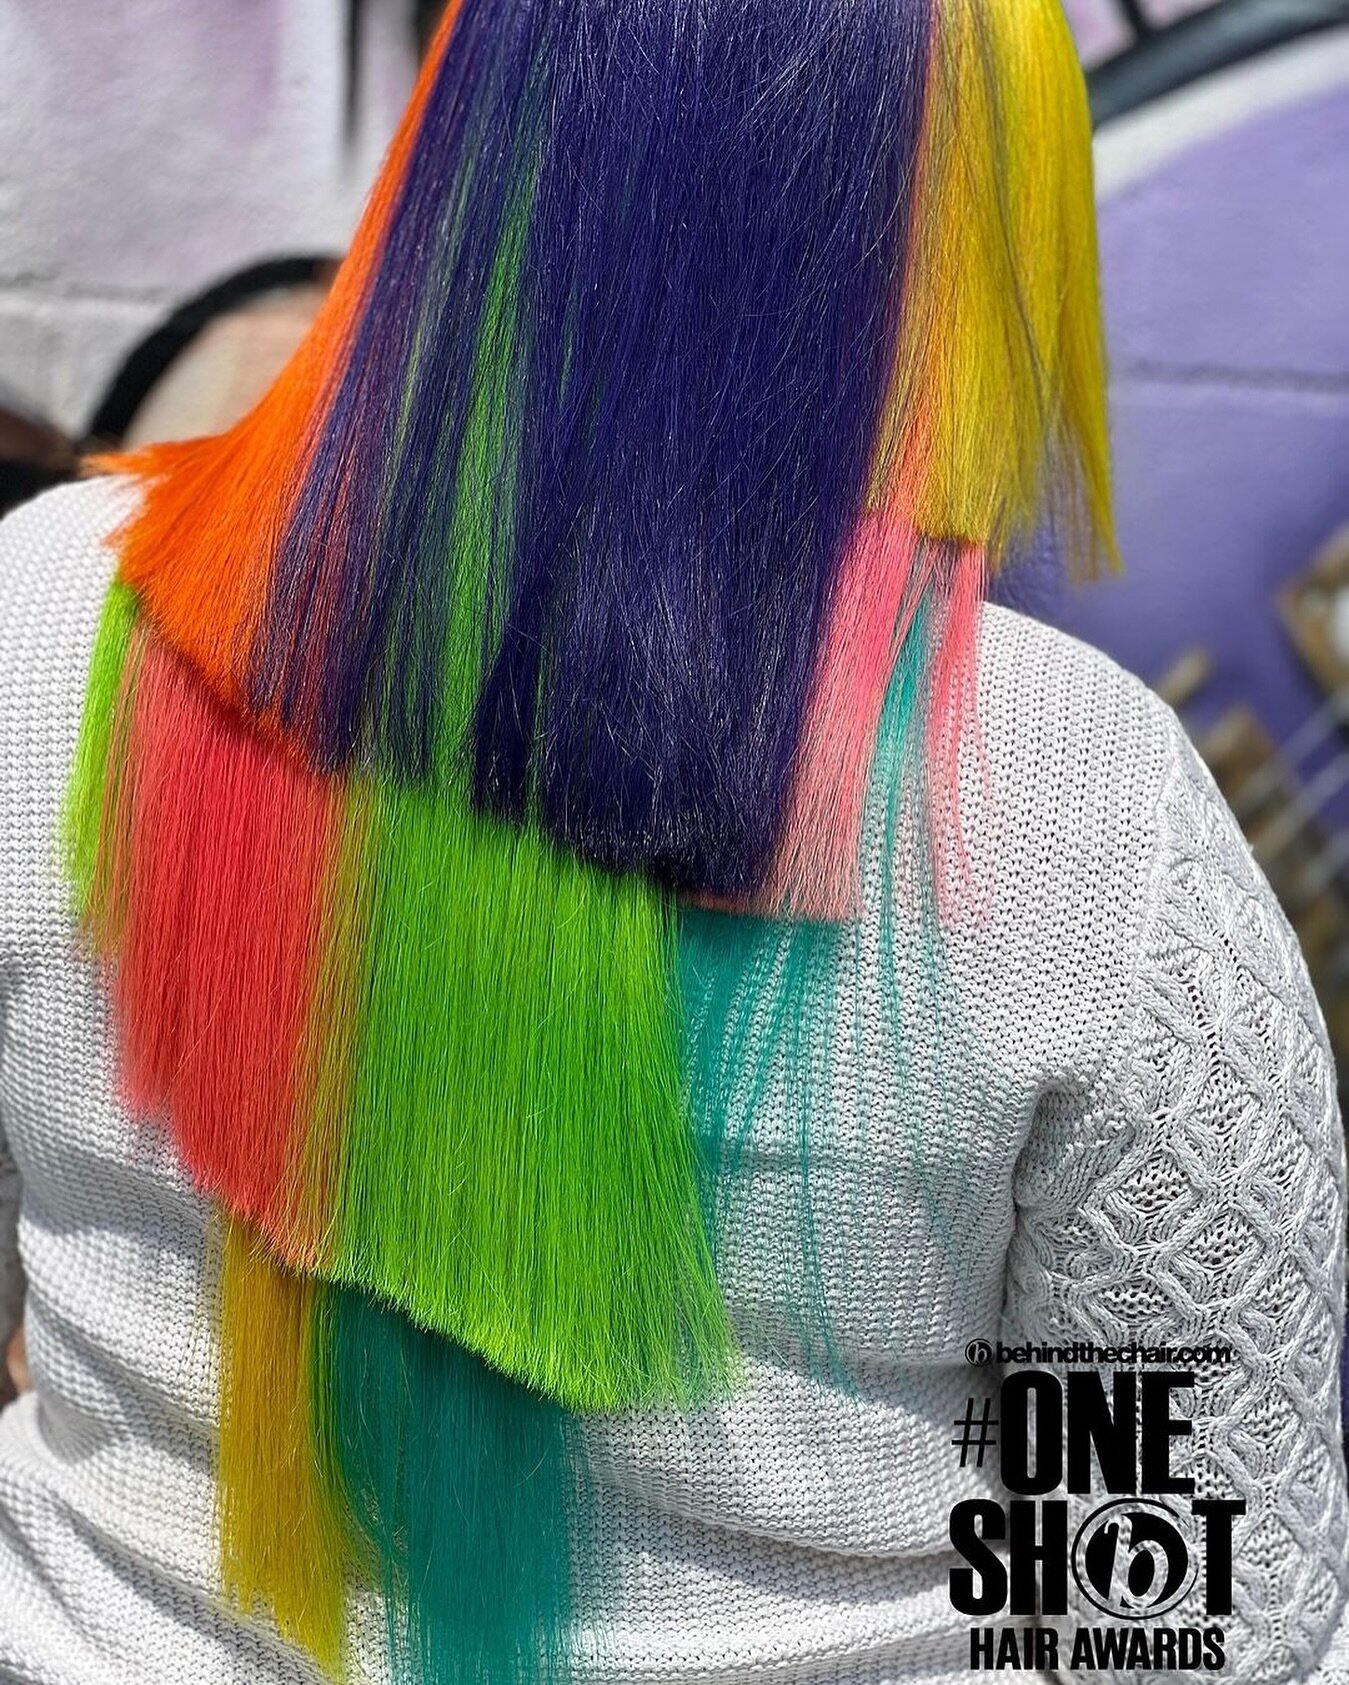 Overall transformation using color blocking techniques to achieve this super unique creative color &amp; cut and featured on CBSnews by hairstylist Grace demonstrating the science and art behind her trade. 
.
.
.
.
.
.
.
Beauty by Grace 
#creativehai